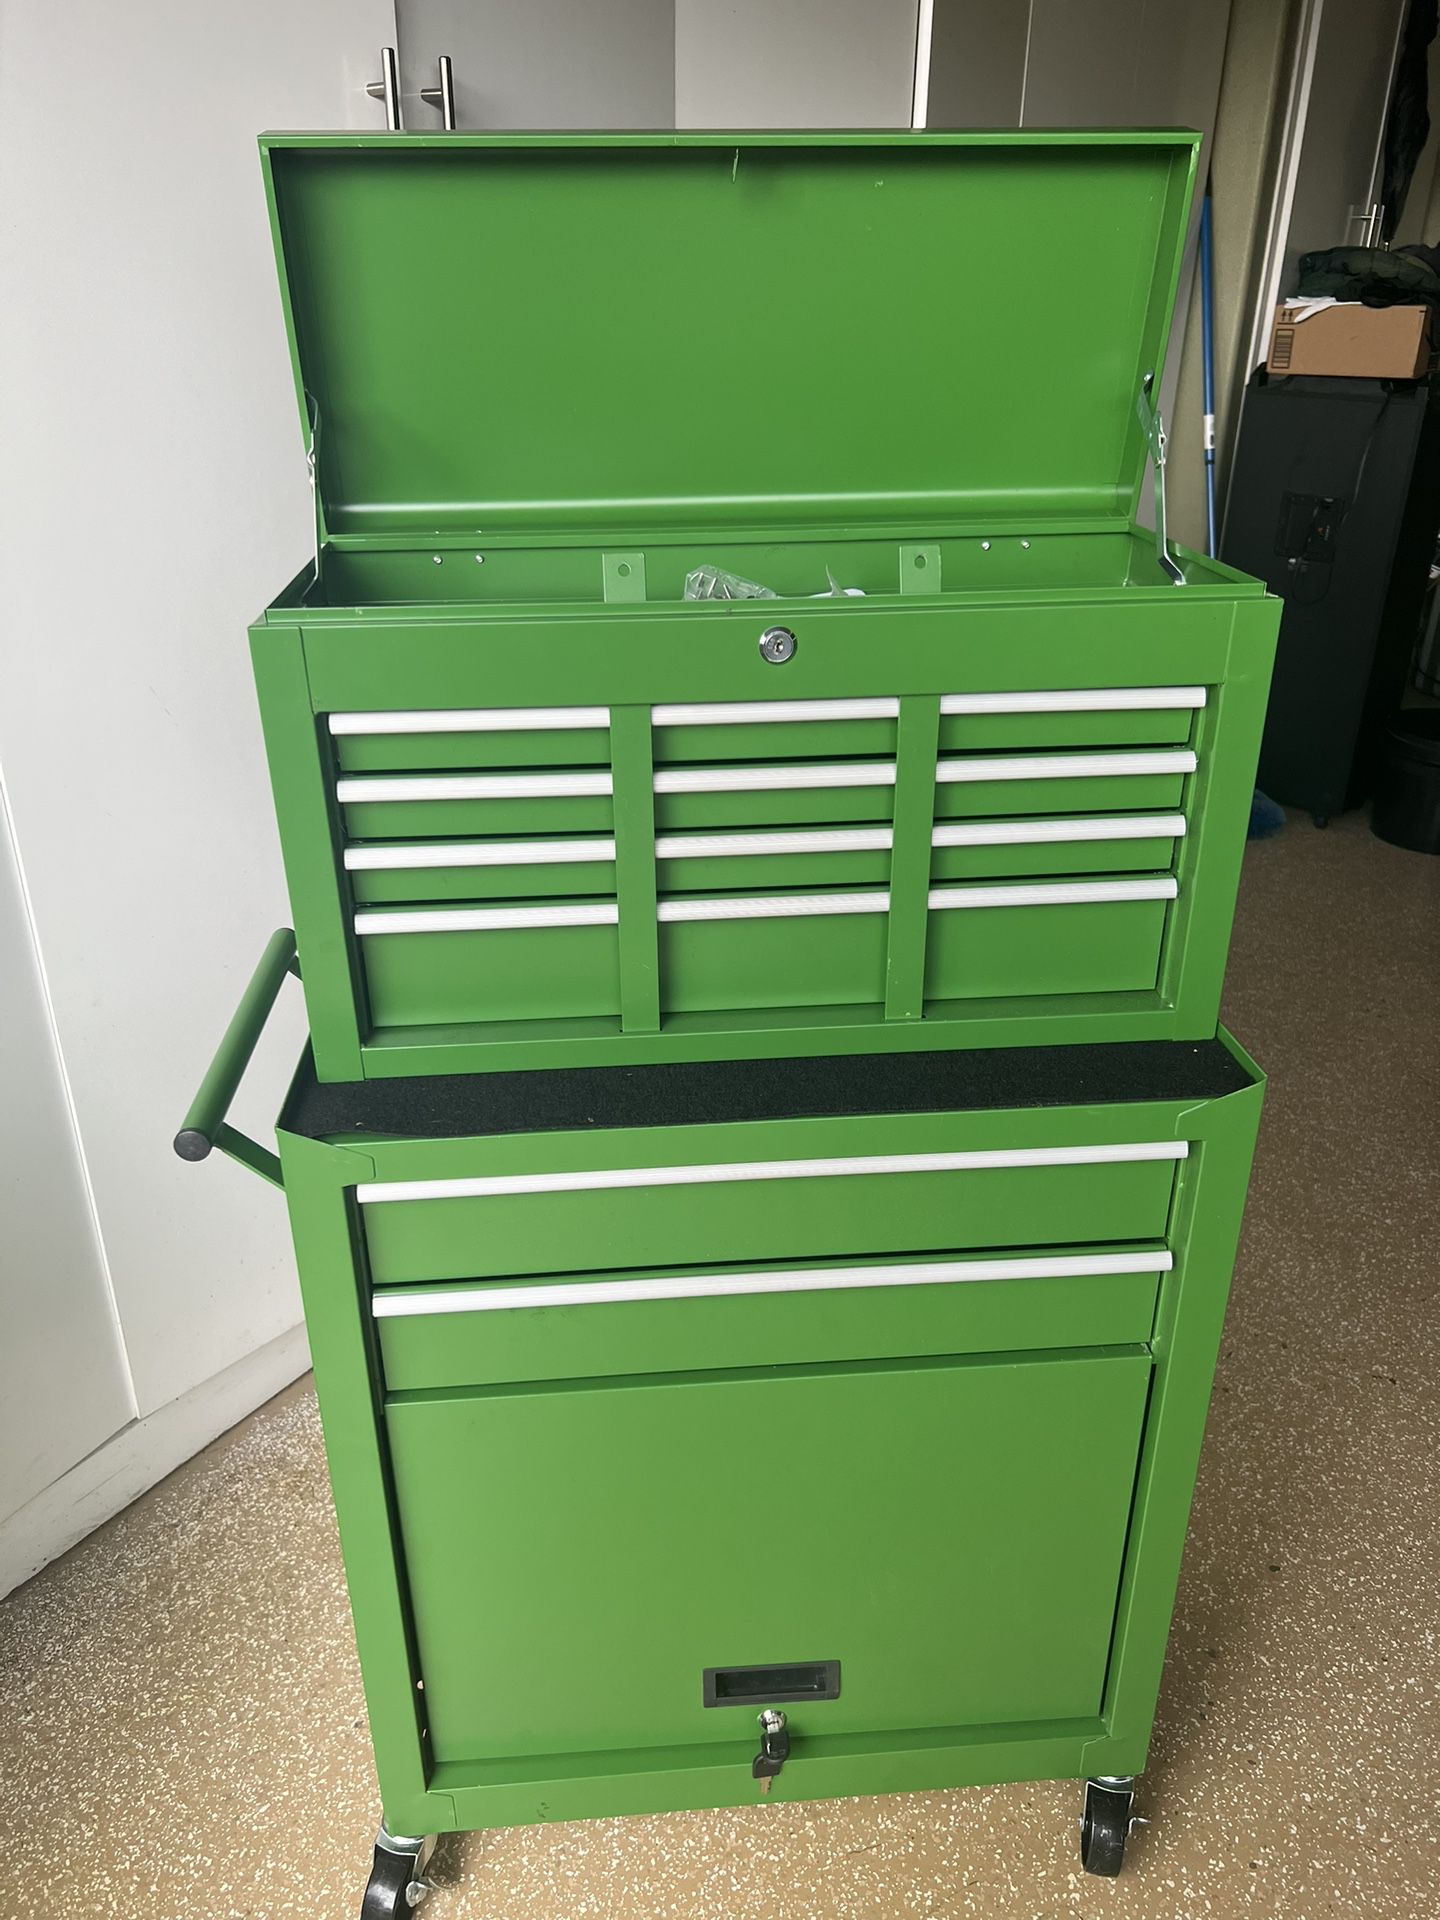 Tool Box Without Keys 